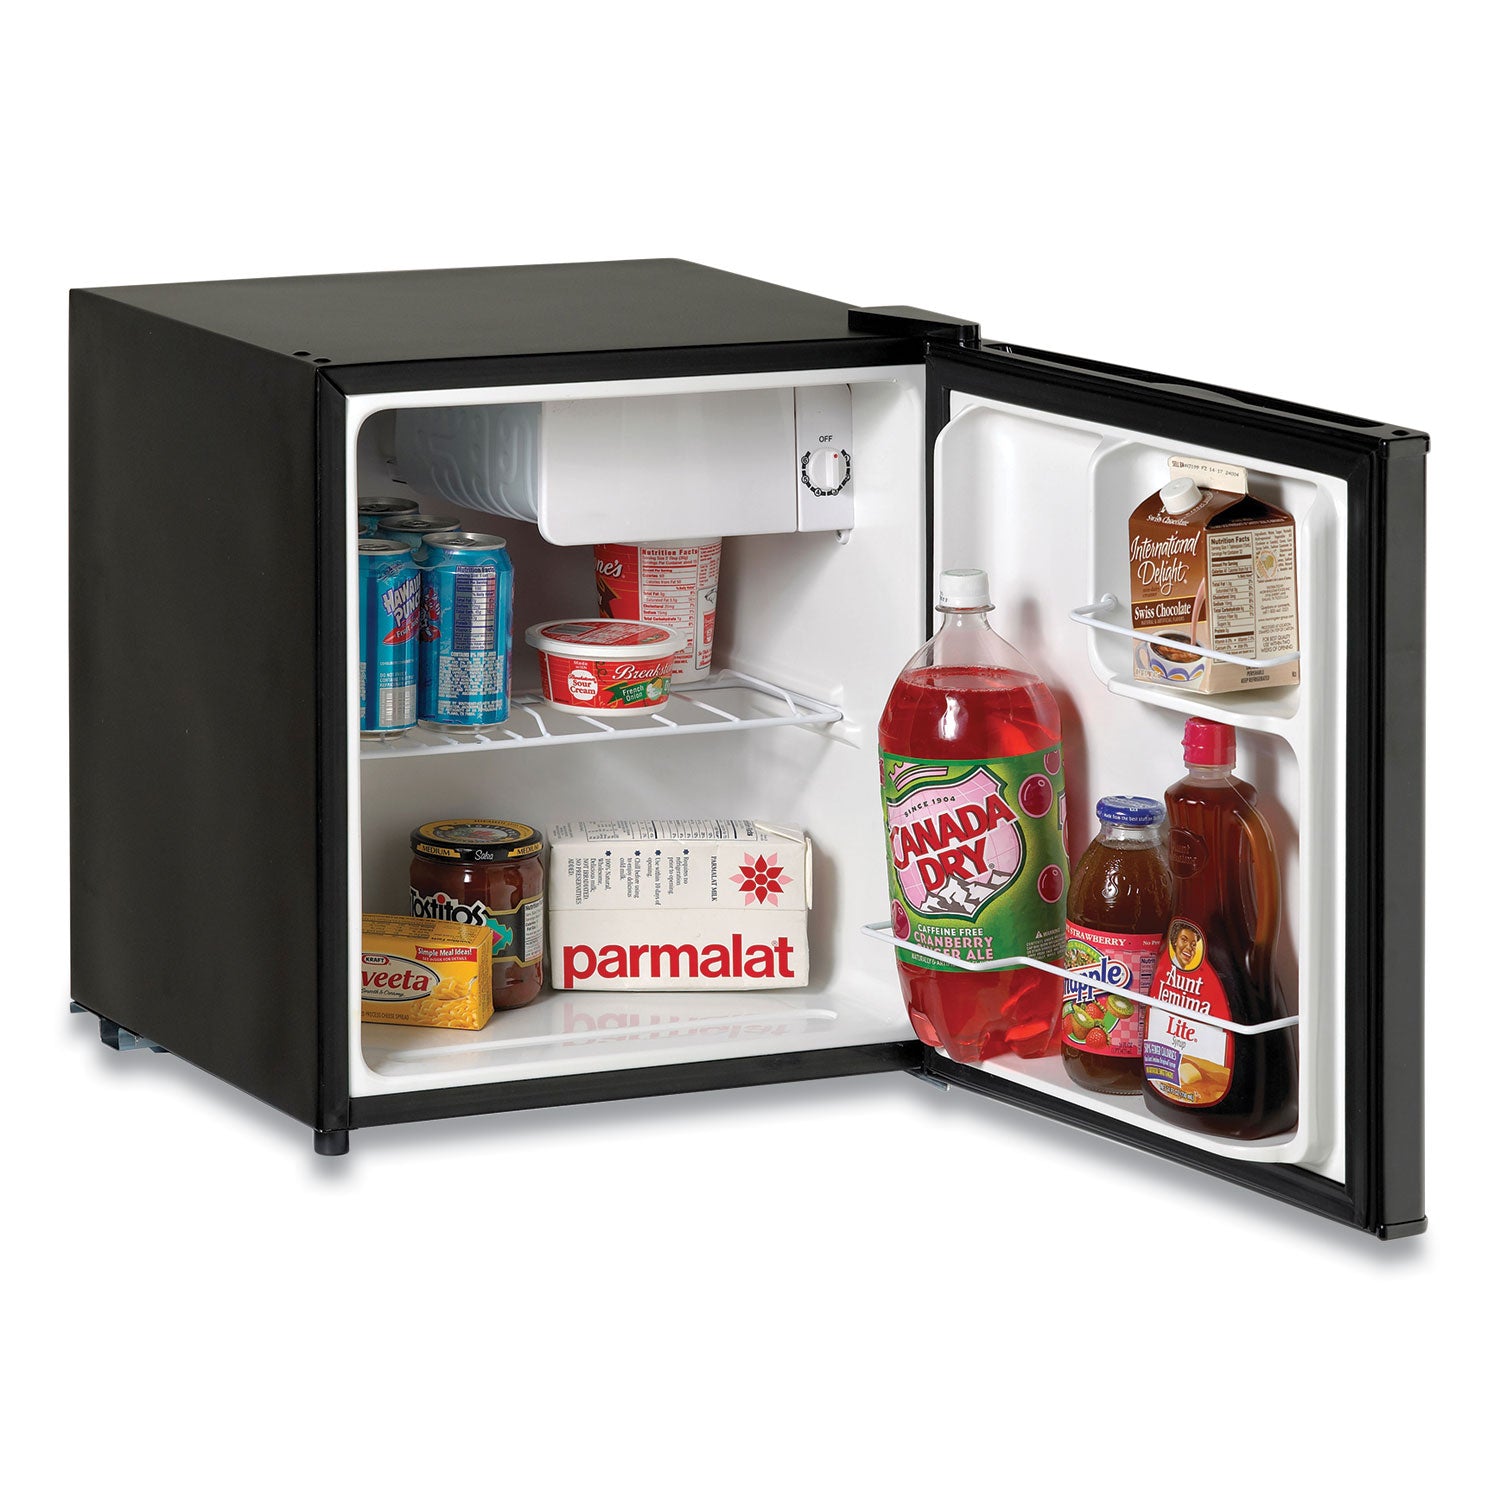 17-cubic-ft-compact-refrigerator-with-chiller-compartment-black_avarm16j1b17x1b - 2